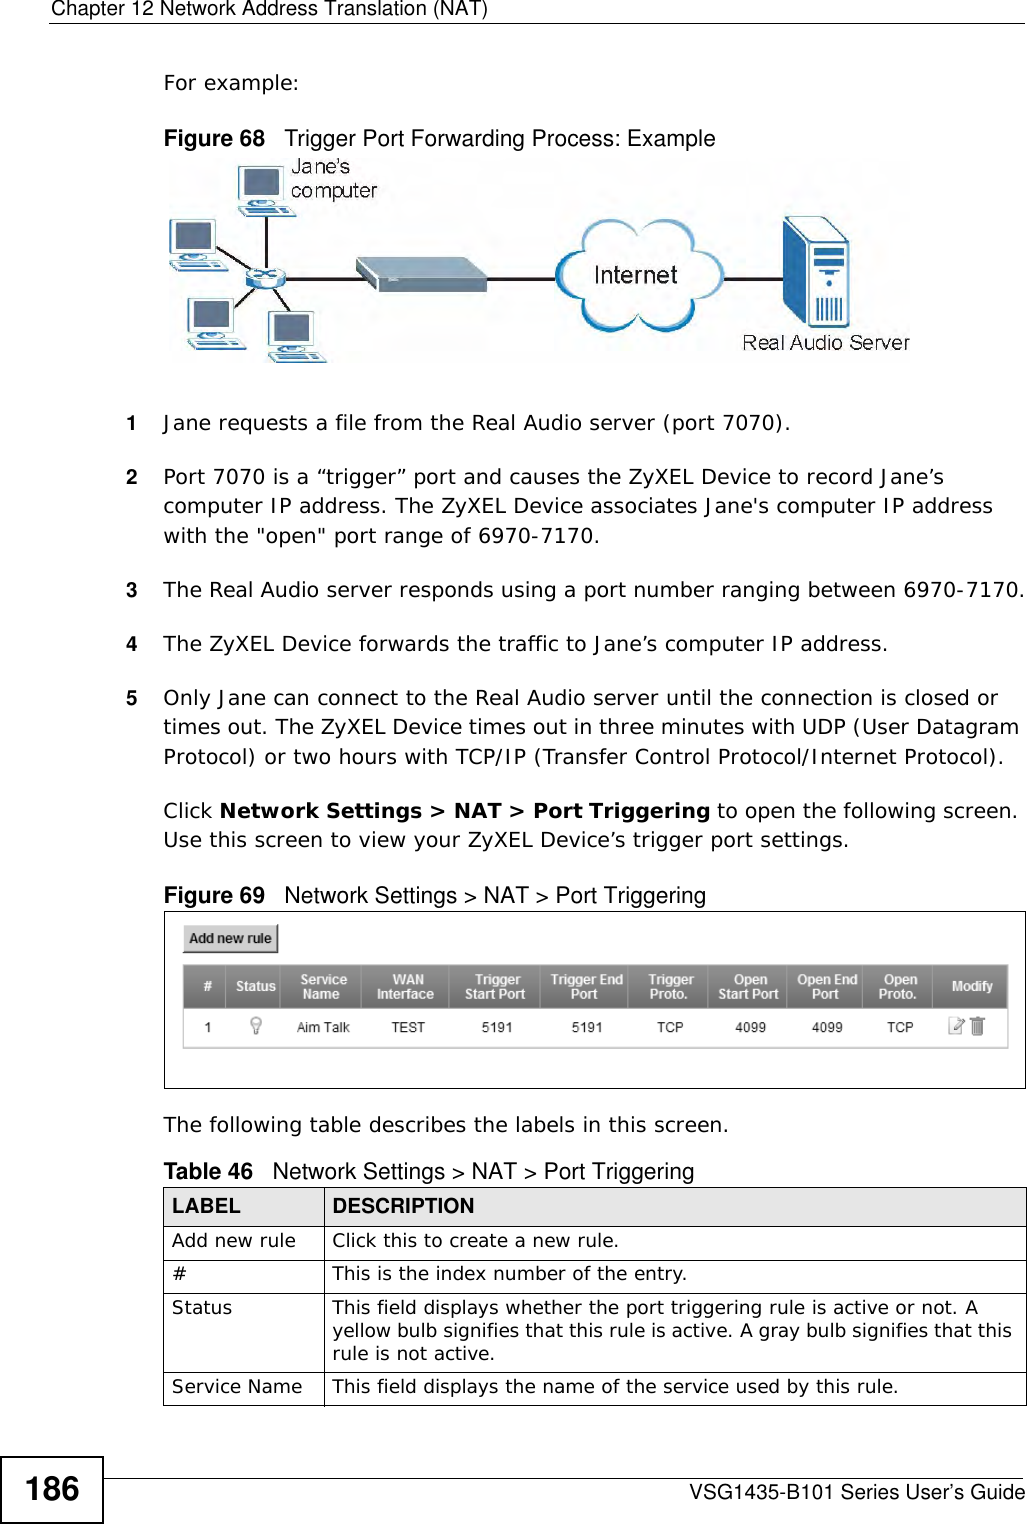 Chapter 12 Network Address Translation (NAT)VSG1435-B101 Series User’s Guide186For example:Figure 68   Trigger Port Forwarding Process: Example1Jane requests a file from the Real Audio server (port 7070).2Port 7070 is a “trigger” port and causes the ZyXEL Device to record Jane’s computer IP address. The ZyXEL Device associates Jane&apos;s computer IP address with the &quot;open&quot; port range of 6970-7170.3The Real Audio server responds using a port number ranging between 6970-7170.4The ZyXEL Device forwards the traffic to Jane’s computer IP address. 5Only Jane can connect to the Real Audio server until the connection is closed or times out. The ZyXEL Device times out in three minutes with UDP (User Datagram Protocol) or two hours with TCP/IP (Transfer Control Protocol/Internet Protocol). Click Network Settings &gt; NAT &gt; Port Triggering to open the following screen. Use this screen to view your ZyXEL Device’s trigger port settings.Figure 69   Network Settings &gt; NAT &gt; Port Triggering The following table describes the labels in this screen. Table 46   Network Settings &gt; NAT &gt; Port TriggeringLABEL DESCRIPTIONAdd new rule Click this to create a new rule.#This is the index number of the entry.Status This field displays whether the port triggering rule is active or not. A yellow bulb signifies that this rule is active. A gray bulb signifies that this rule is not active.Service Name This field displays the name of the service used by this rule.